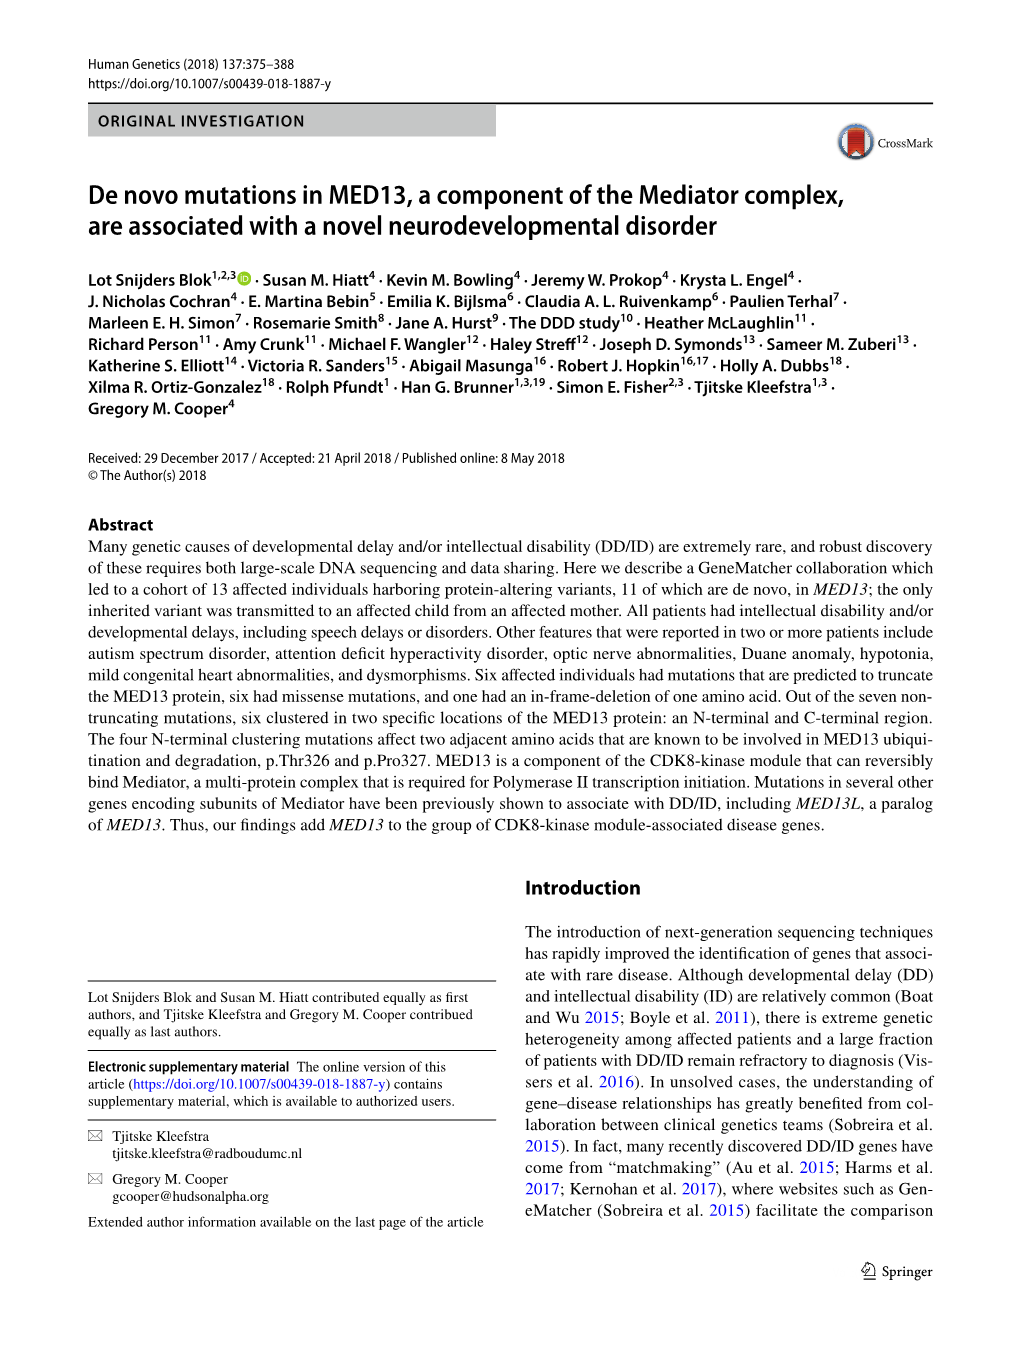 De Novo Mutations in MED13, a Component of the Mediator Complex, Are Associated with a Novel Neurodevelopmental Disorder